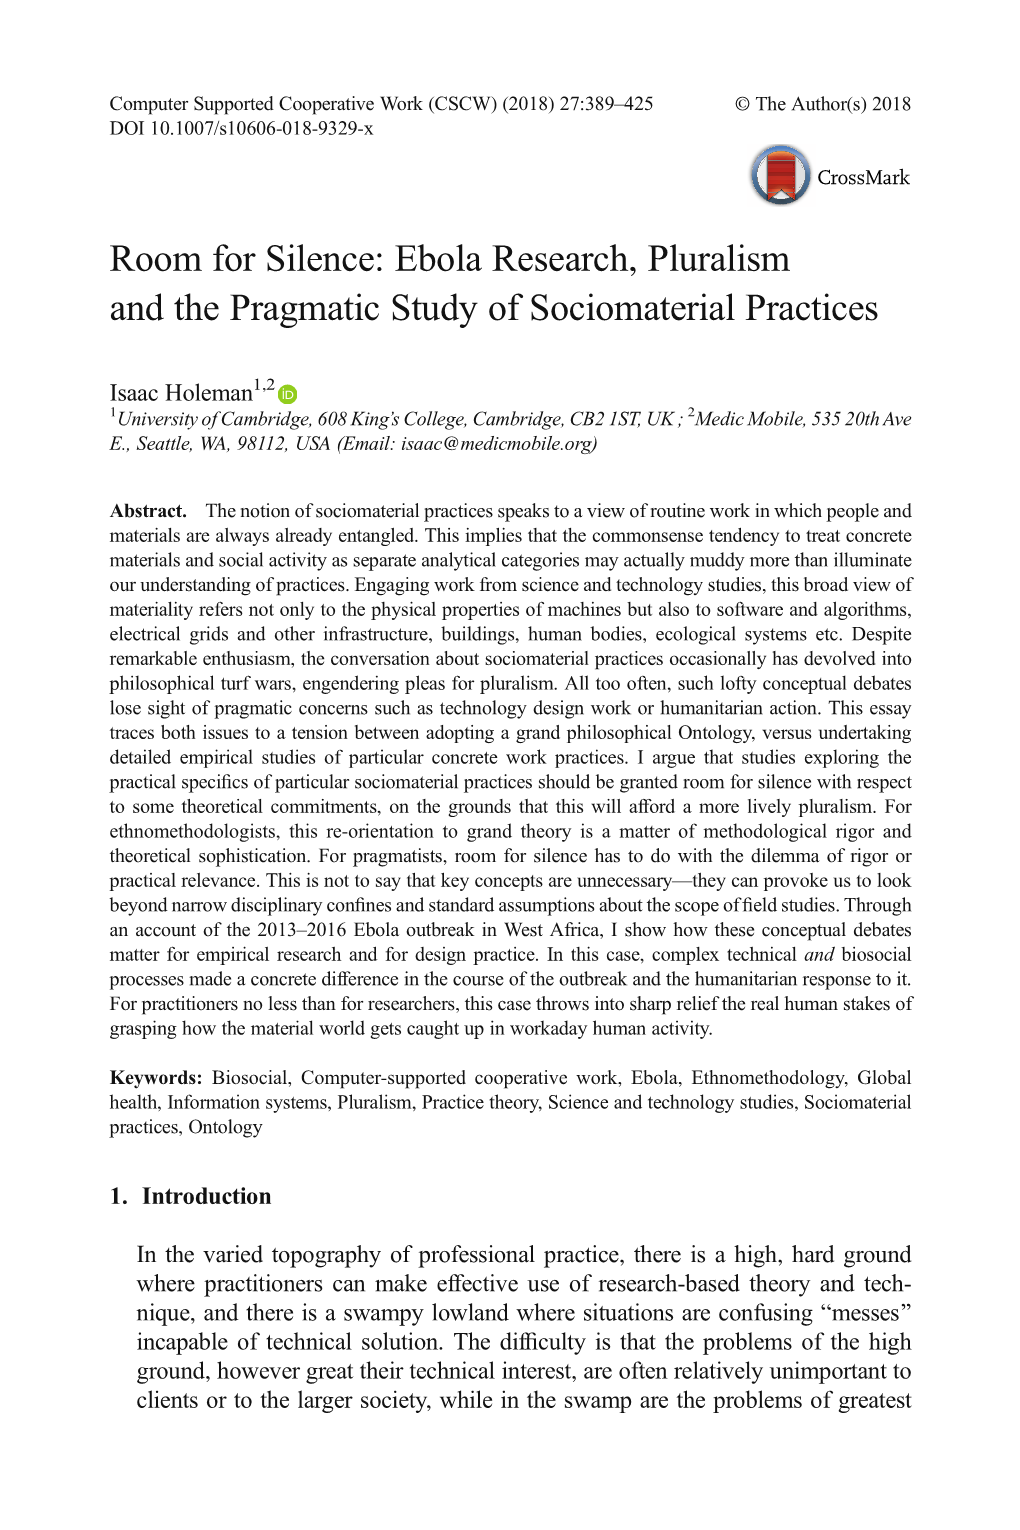 Ebola Research, Pluralism and the Pragmatic Study of Sociomaterial Practices